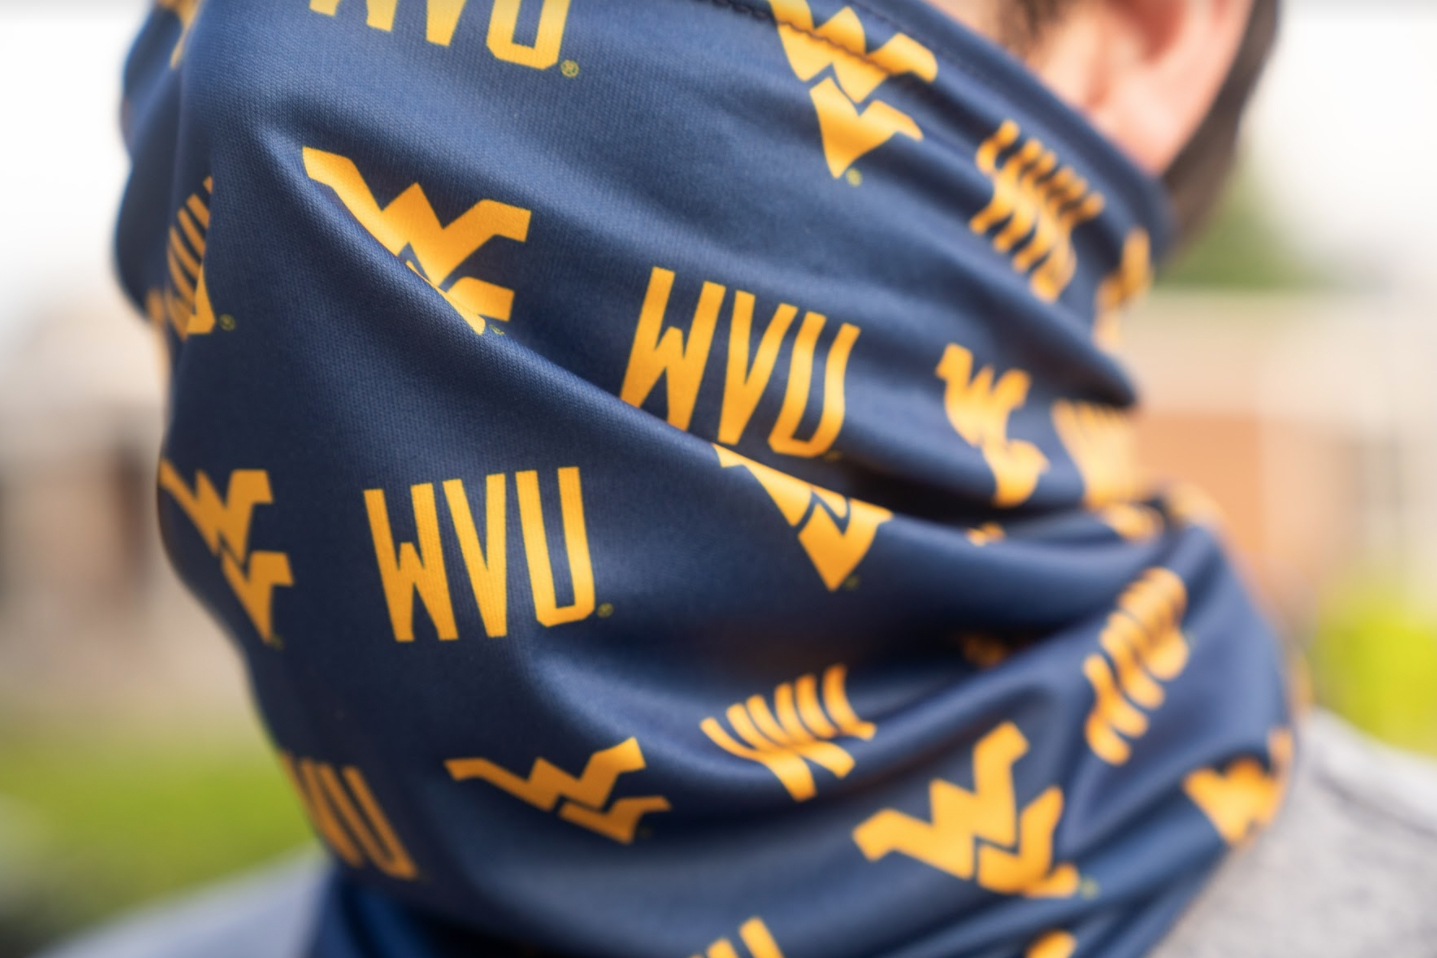 Gaiters do no harm: WVU toxicologists find coverings help contain